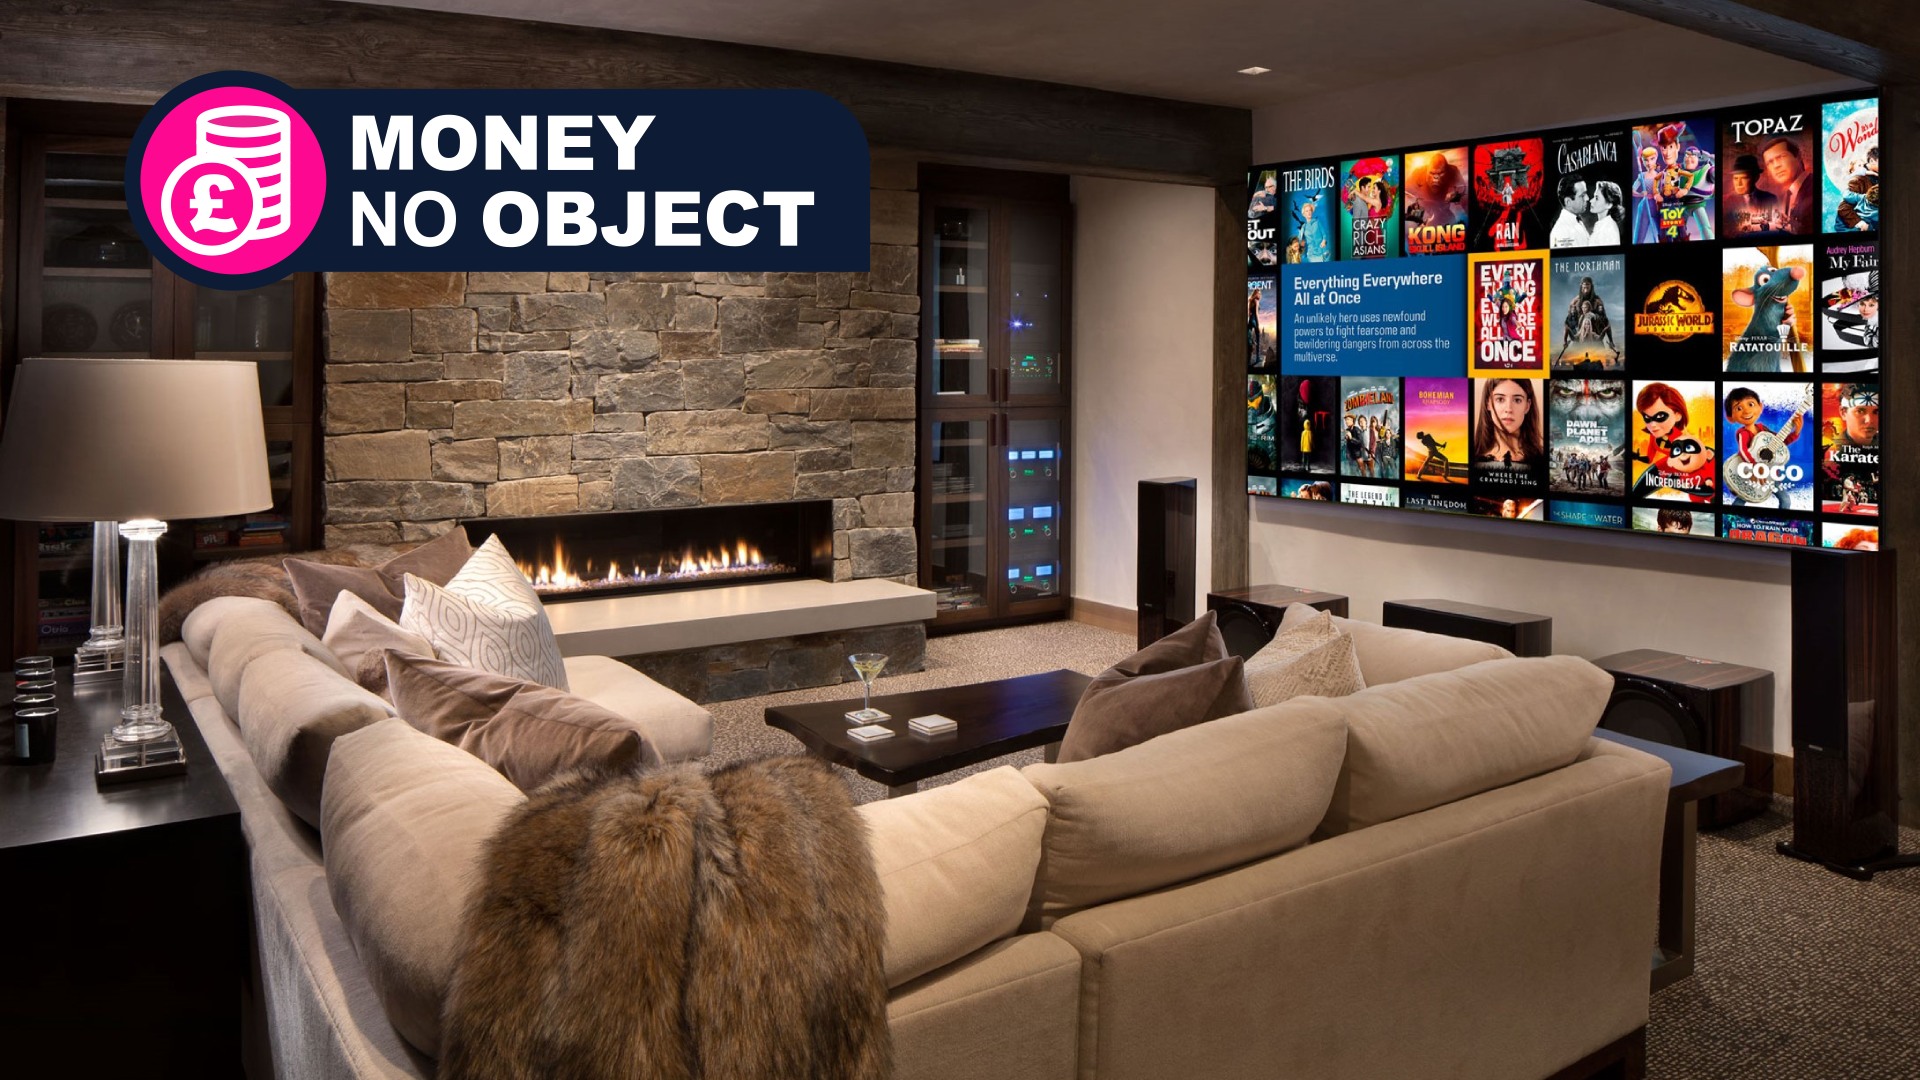 4k Movie, Streaming, Blu-Ray Disc, and Home Theater Product